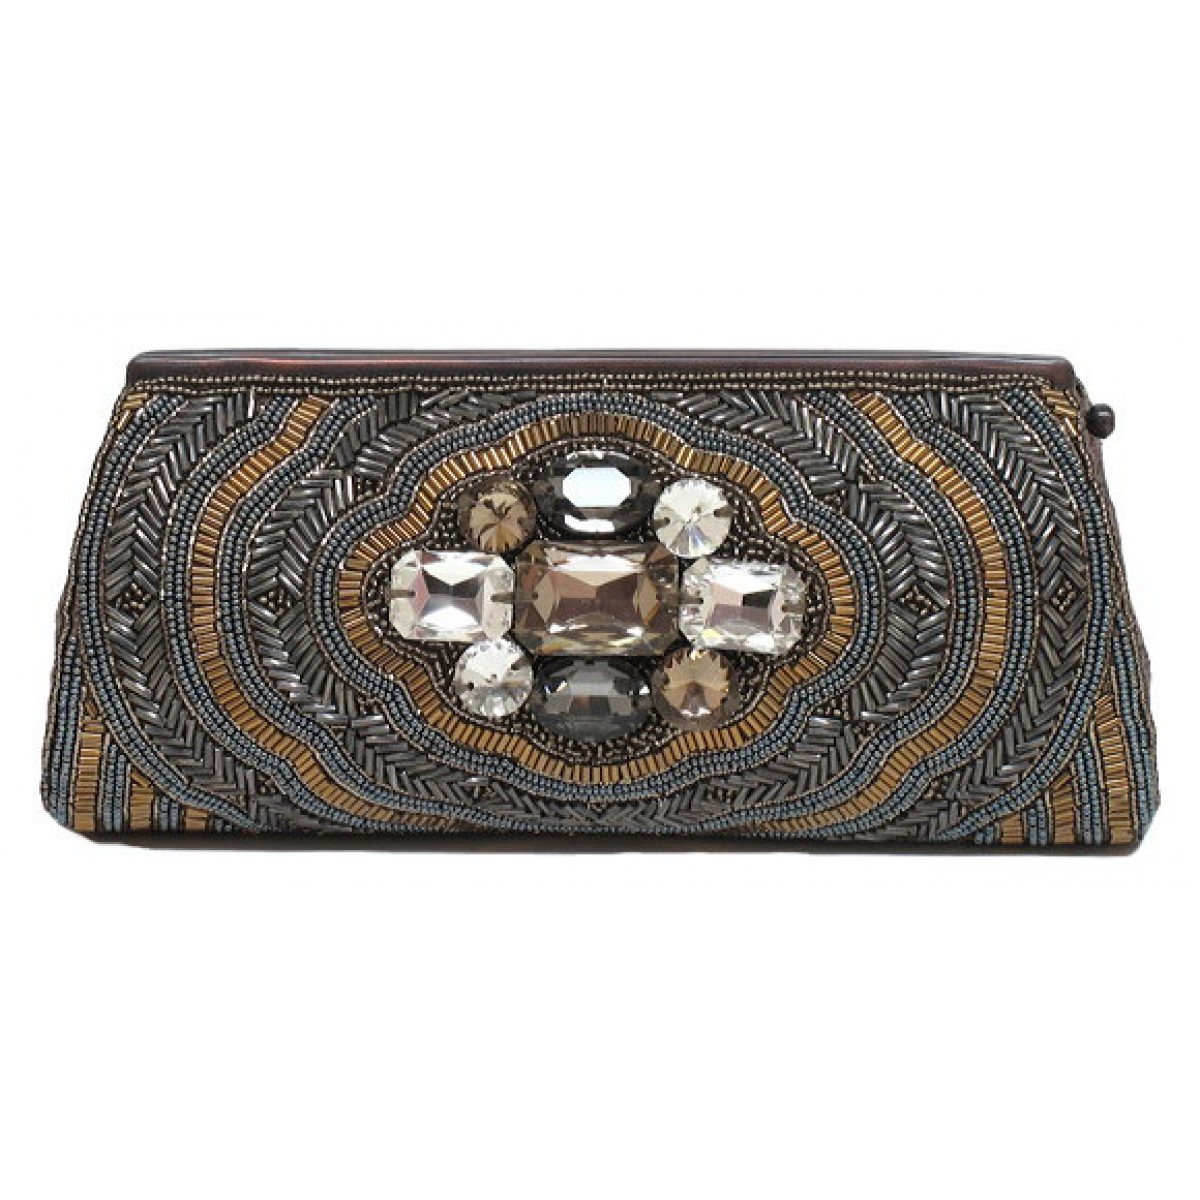 Cylinder Clutch with Crystal Embellishments